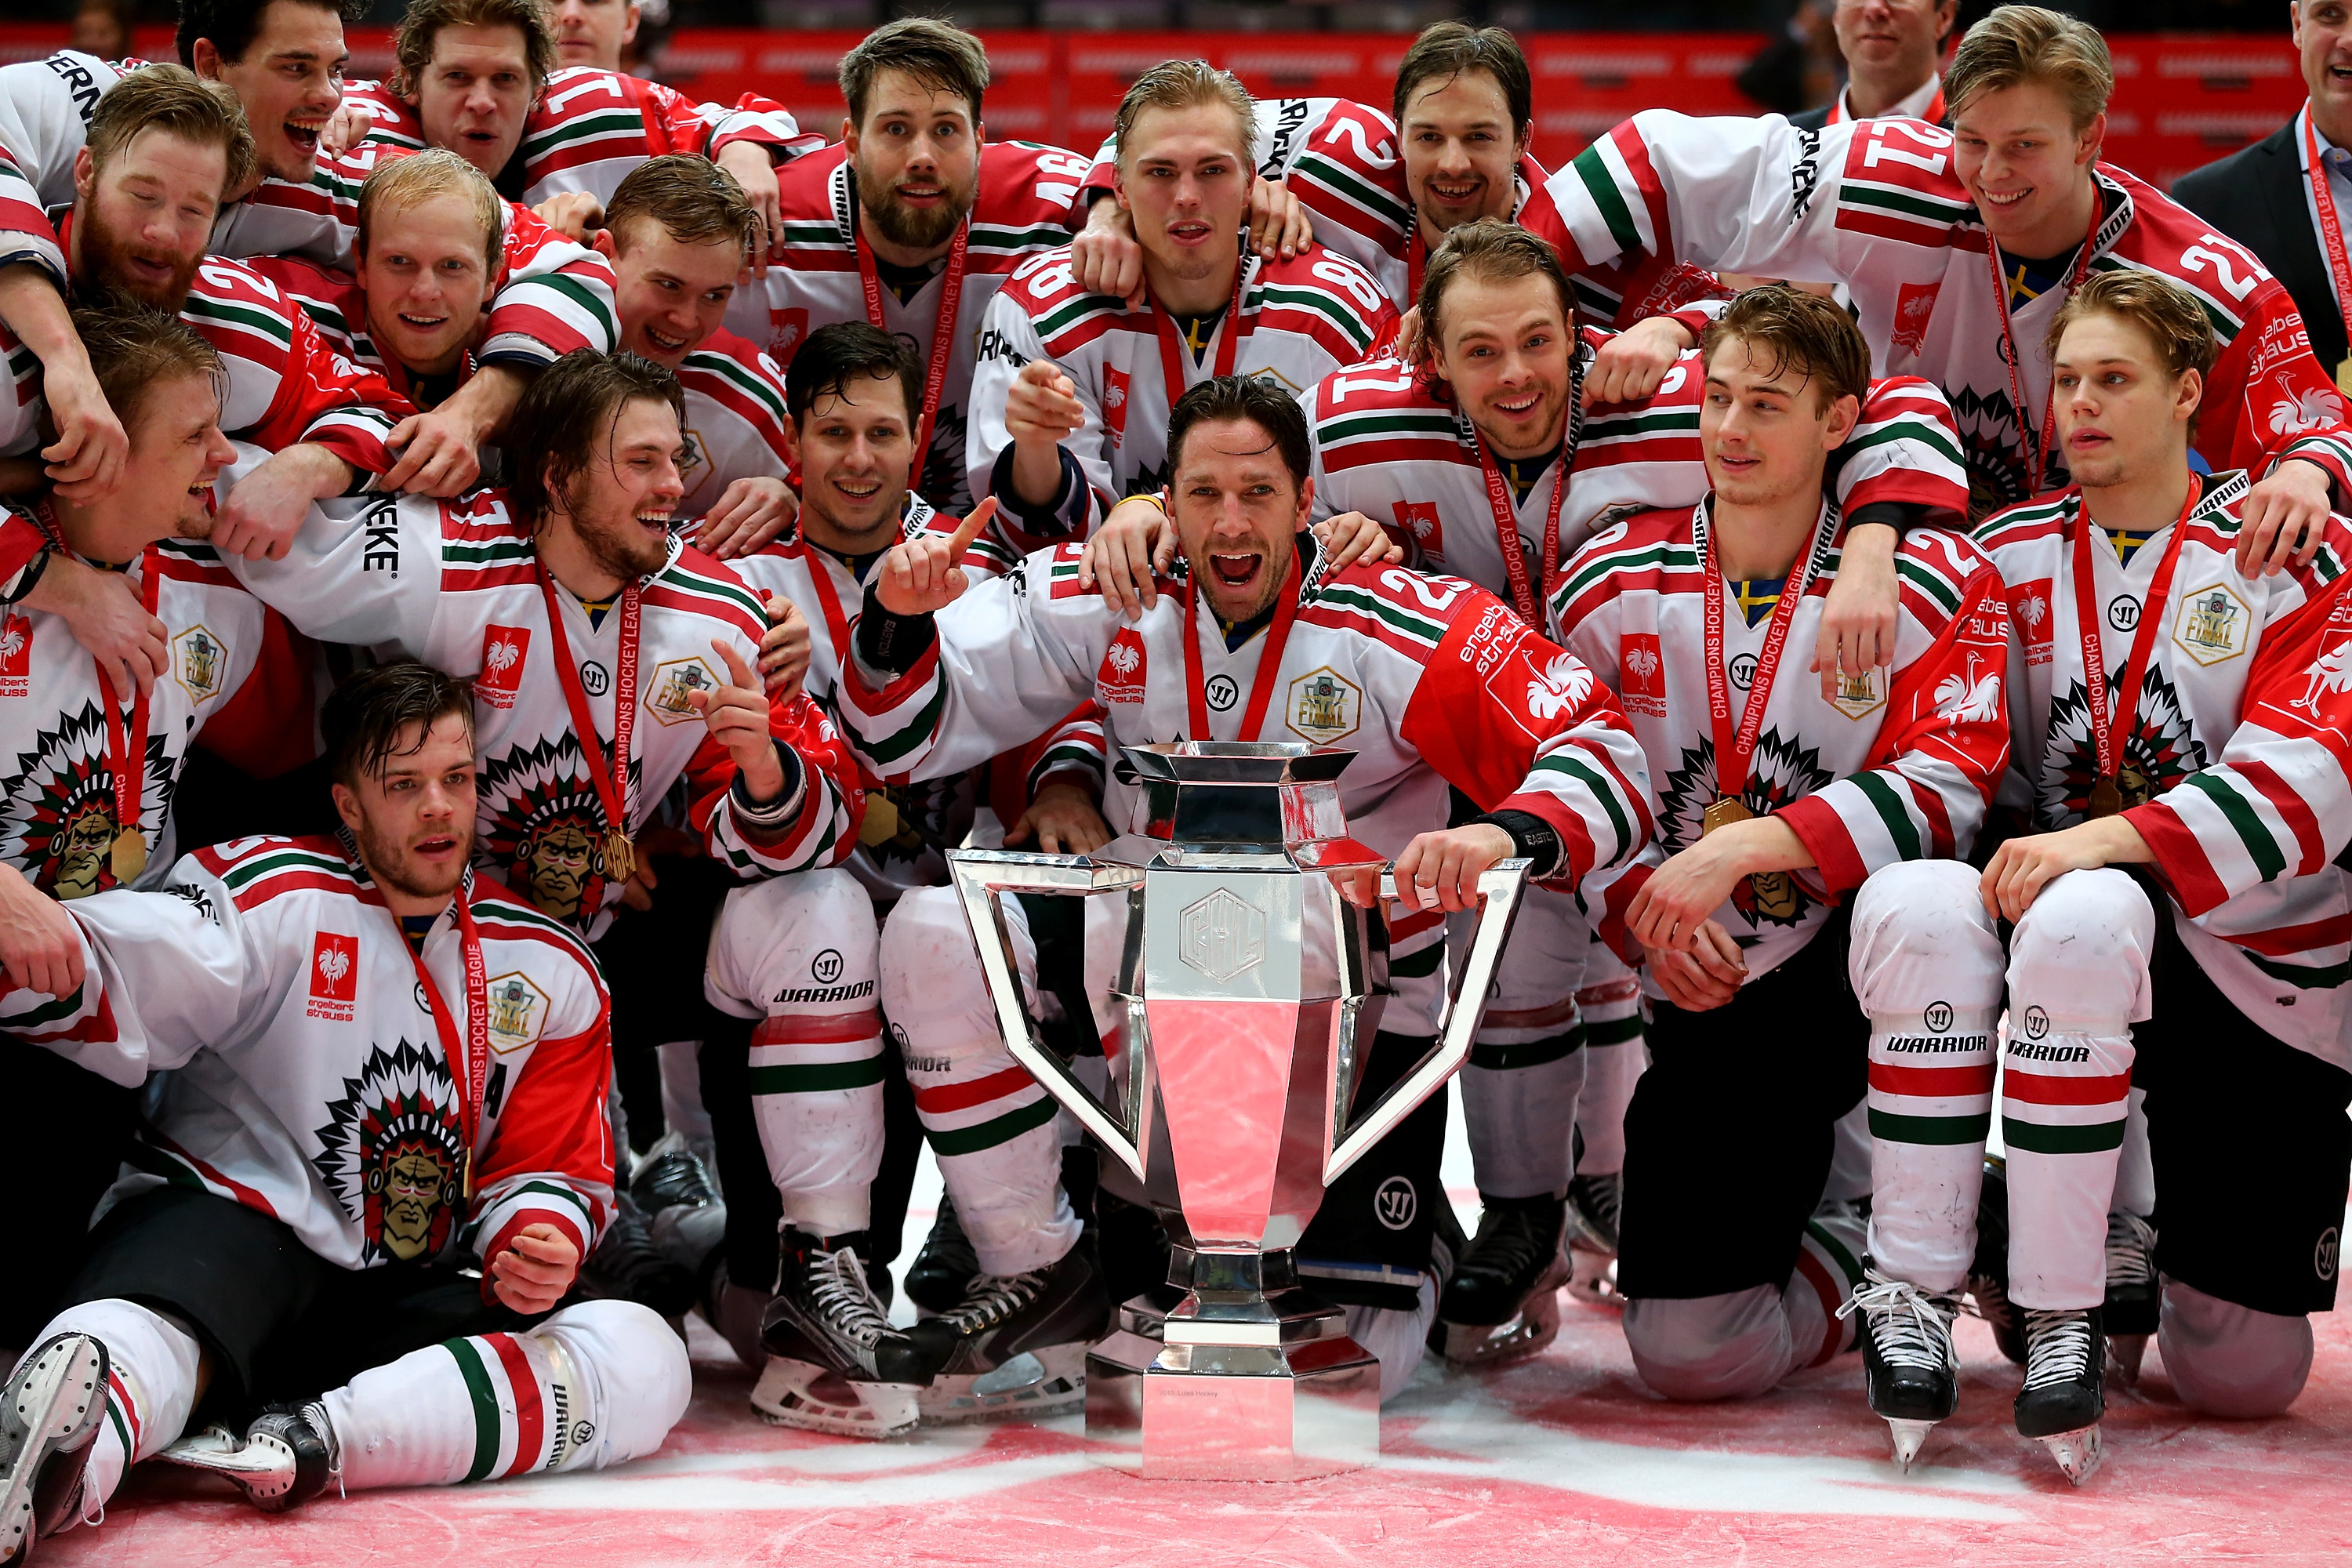 Frolunda team photo with trophy